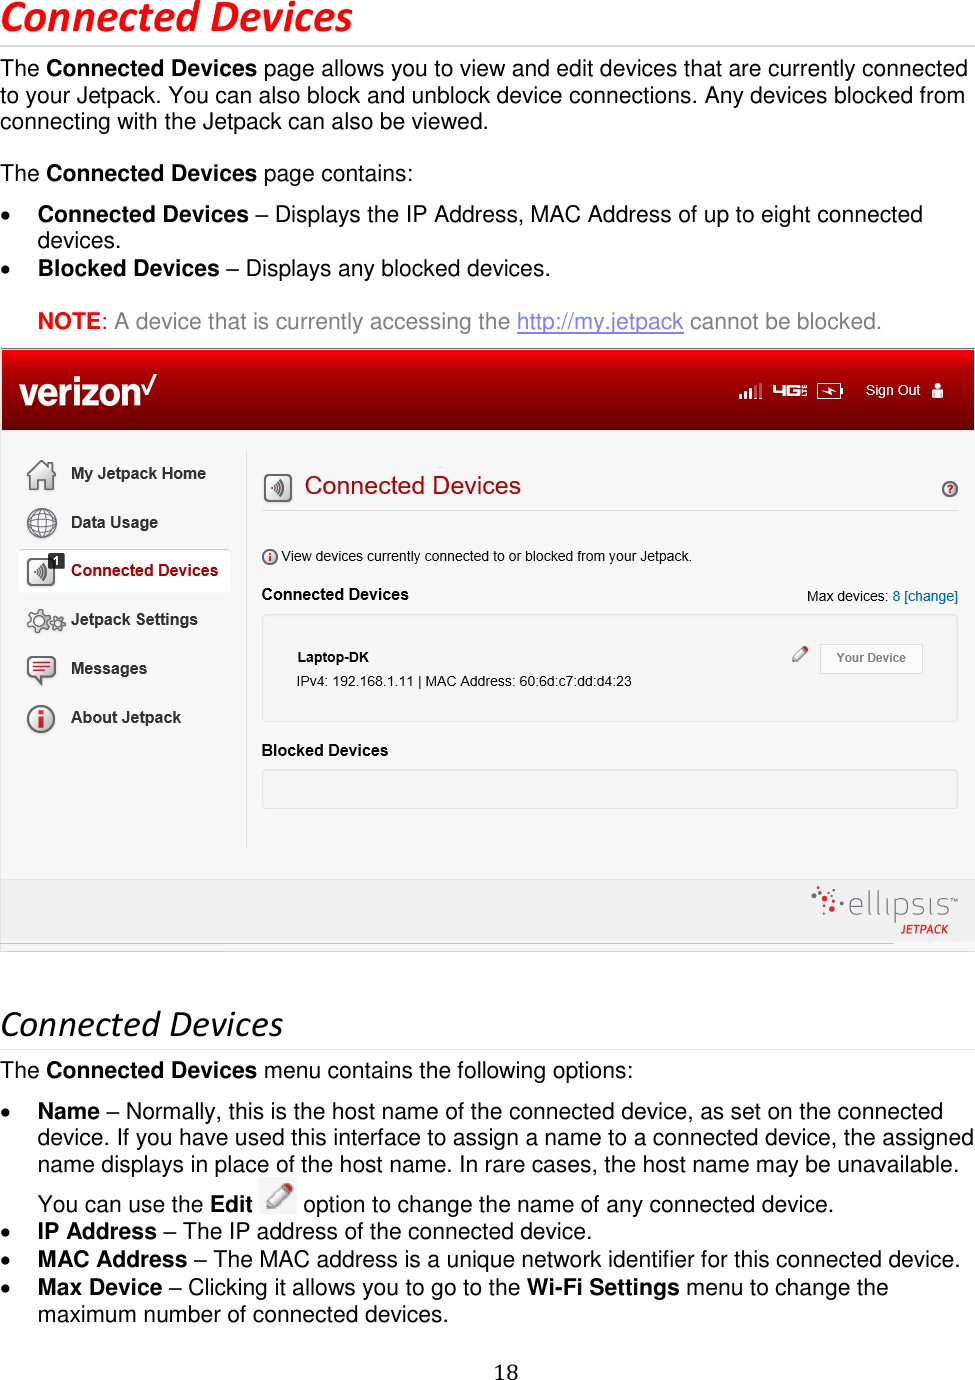   18  Connected Devices The Connected Devices page allows you to view and edit devices that are currently connected to your Jetpack. You can also block and unblock device connections. Any devices blocked from connecting with the Jetpack can also be viewed.  The Connected Devices page contains:  Connected Devices – Displays the IP Address, MAC Address of up to eight connected devices.  Blocked Devices – Displays any blocked devices.  NOTE: A device that is currently accessing the http://my.jetpack cannot be blocked.   Connected Devices The Connected Devices menu contains the following options:  Name – Normally, this is the host name of the connected device, as set on the connected device. If you have used this interface to assign a name to a connected device, the assigned name displays in place of the host name. In rare cases, the host name may be unavailable. You can use the Edit   option to change the name of any connected device.  IP Address – The IP address of the connected device.  MAC Address – The MAC address is a unique network identifier for this connected device.  Max Device – Clicking it allows you to go to the Wi-Fi Settings menu to change the maximum number of connected devices. 